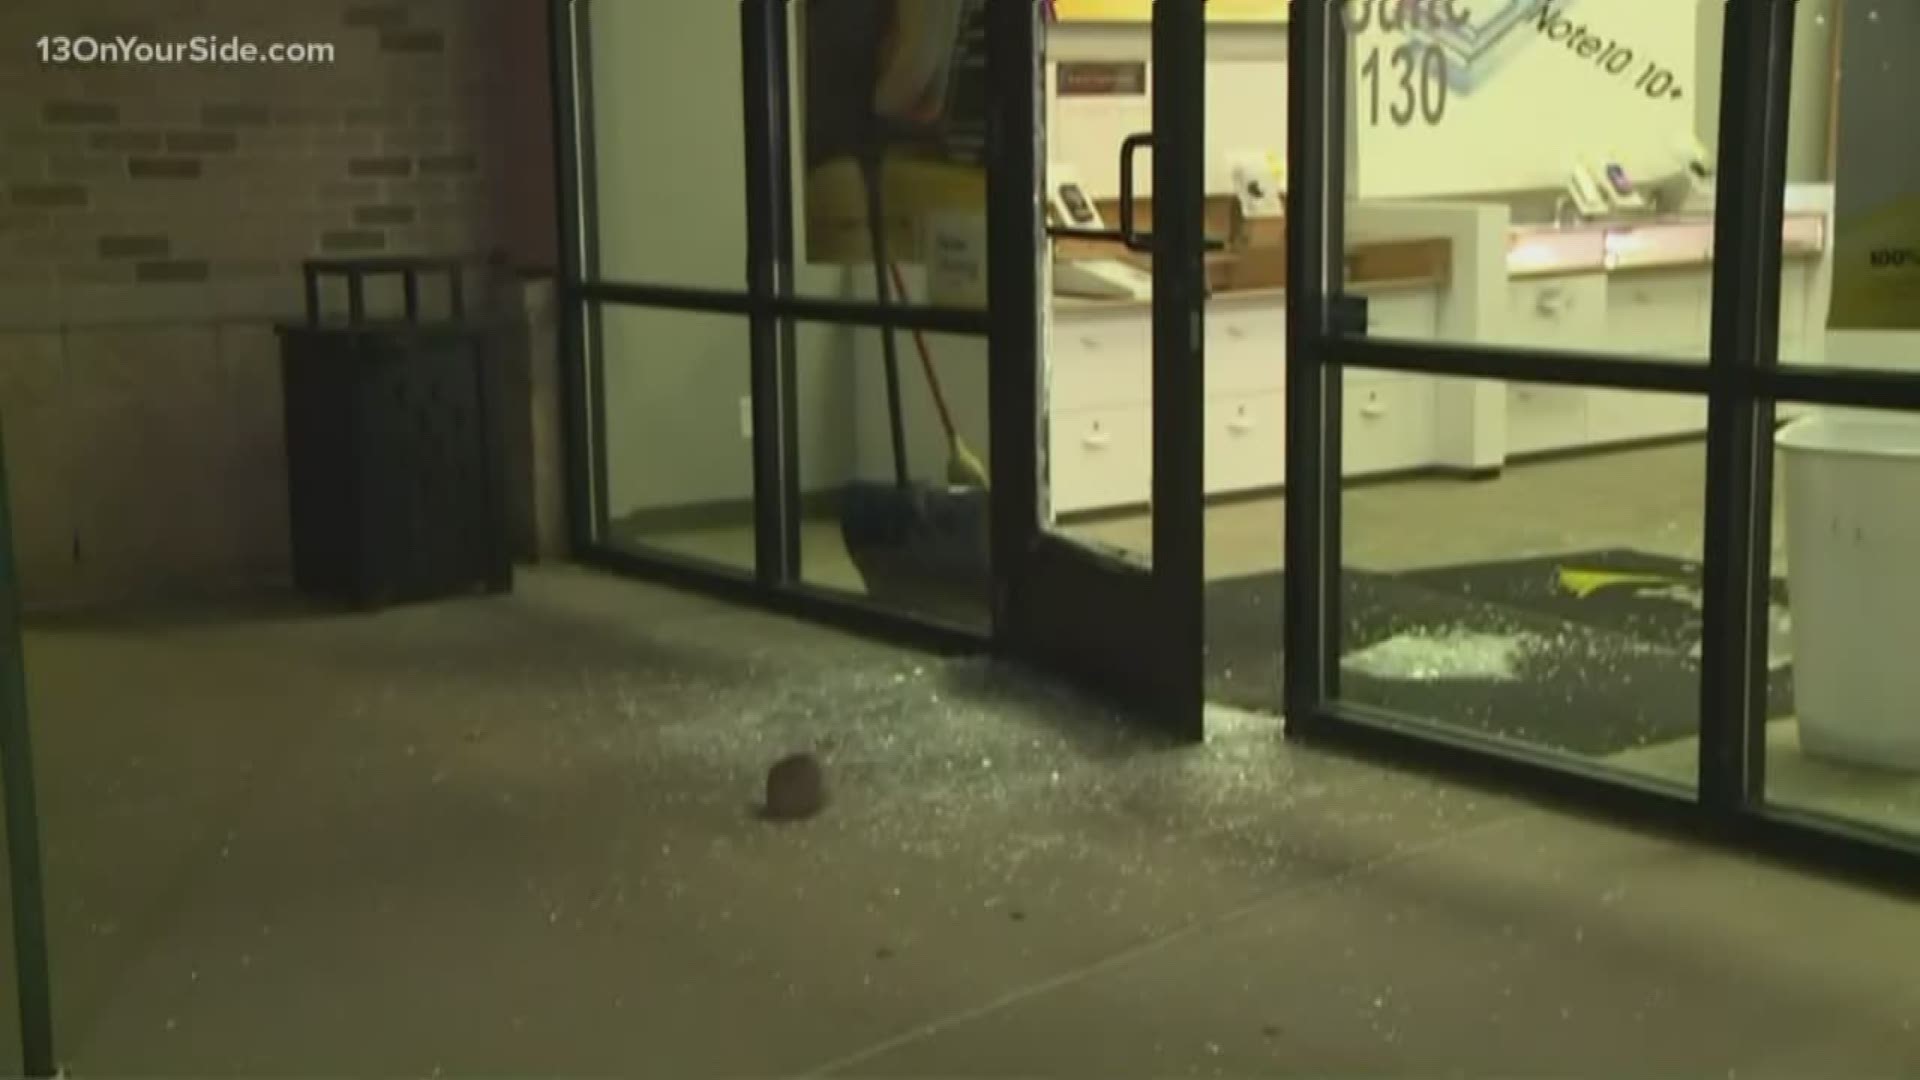 Yet another cell phone store has been broken into in West Michigan. This time, a Sprint store in Wyoming. This is the 13th cell phone store to be robbed between Kent and Ottawa counties in the last two weeks.